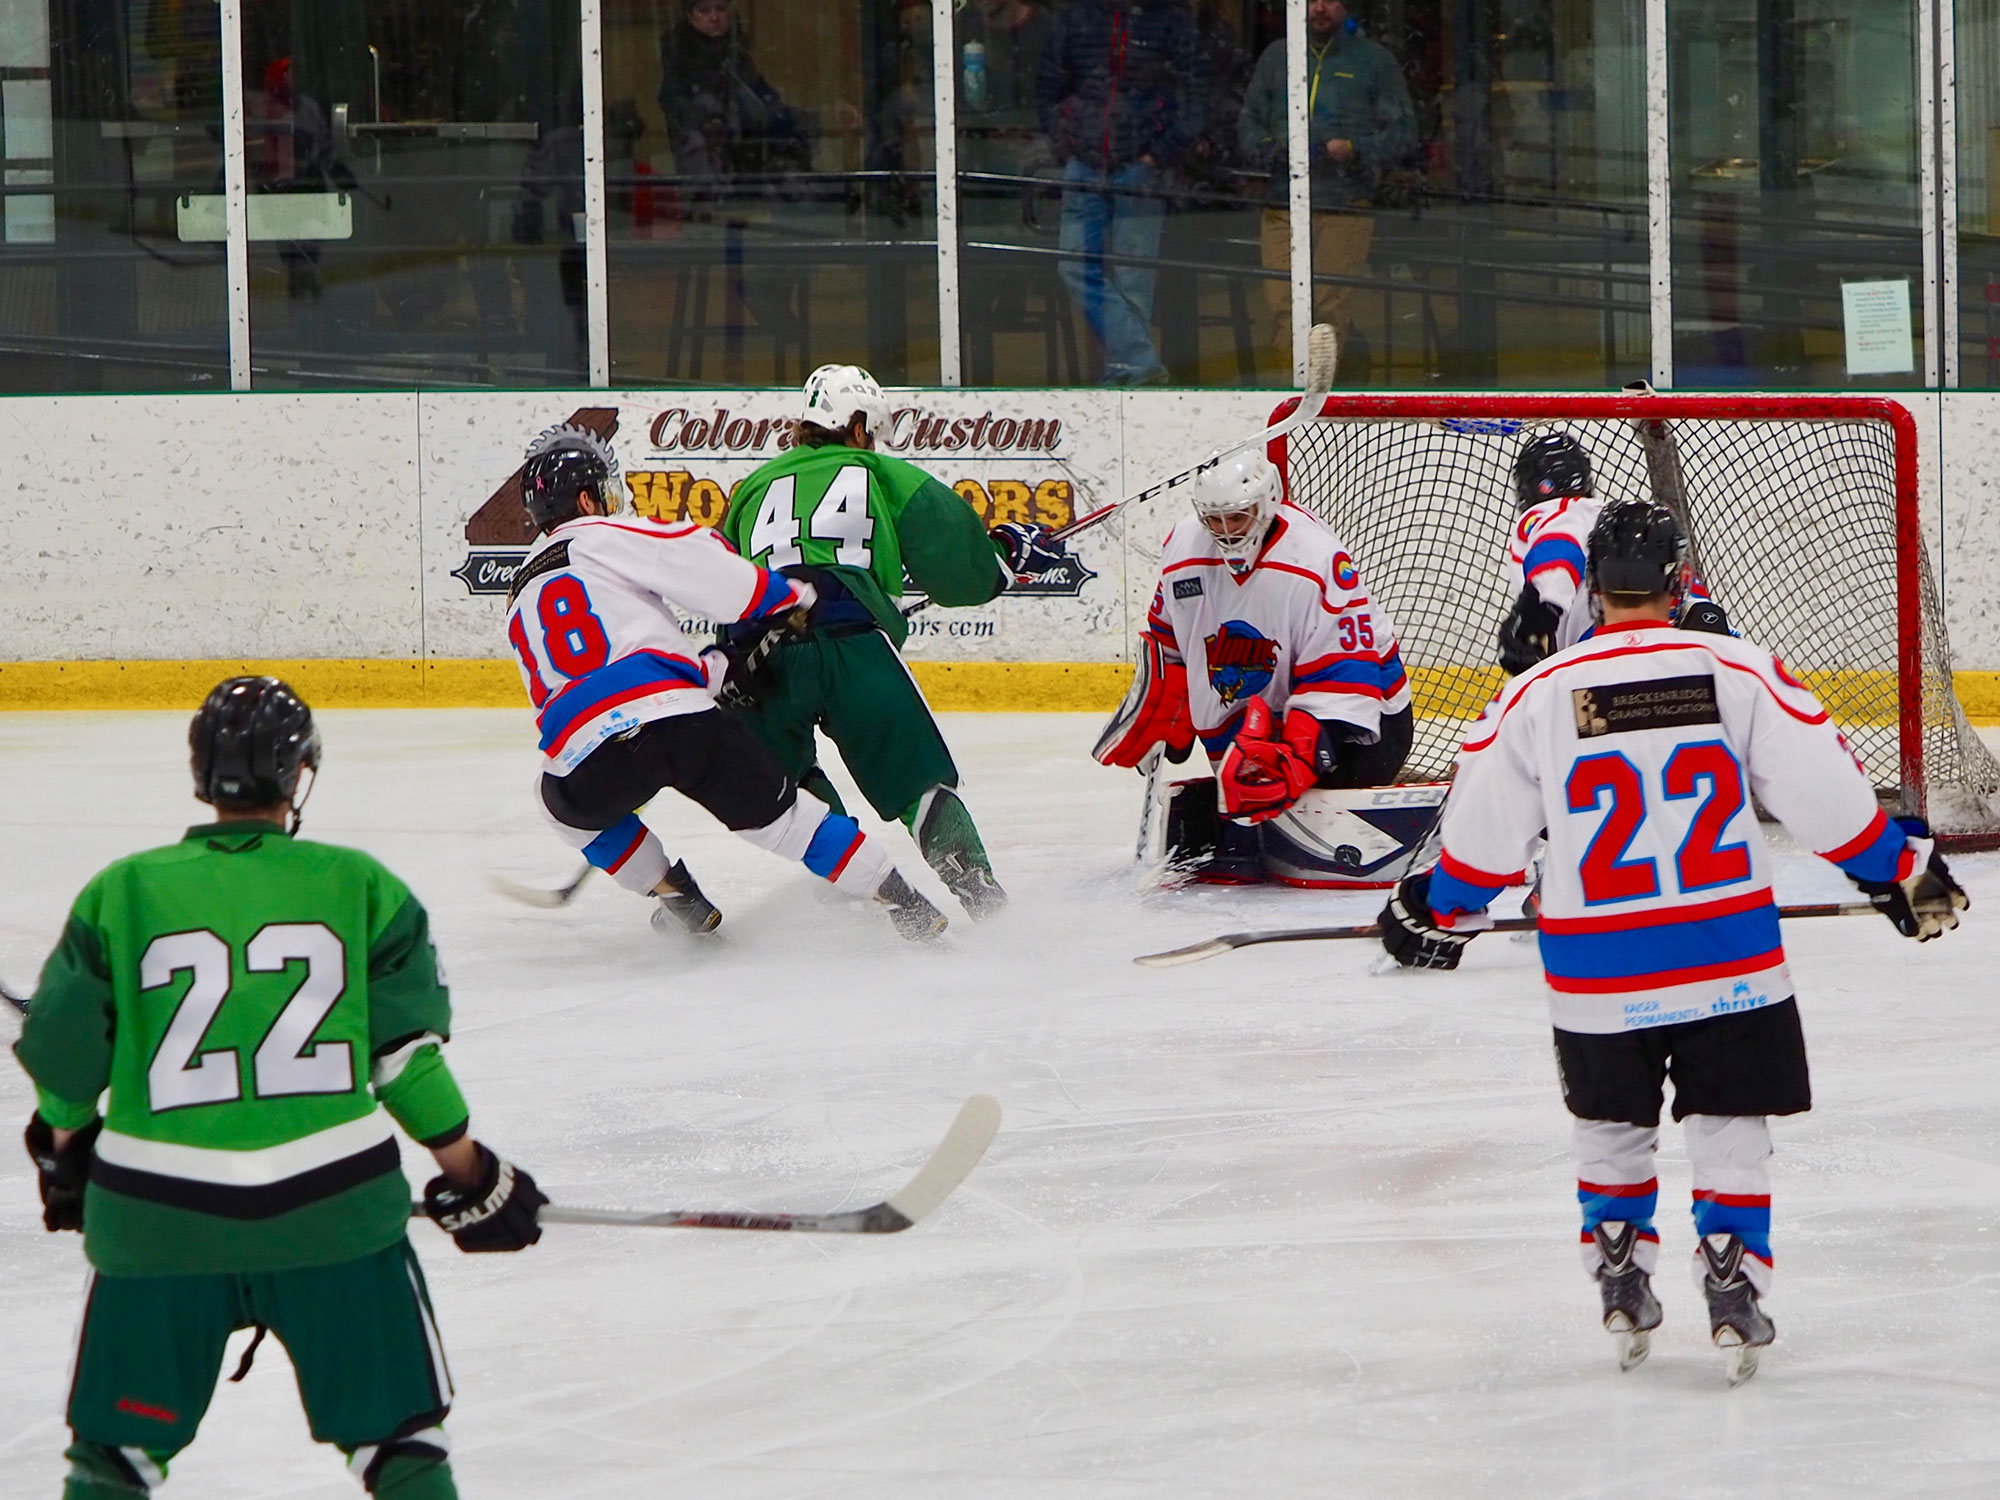 Viper Ice Hockey players defend their goal